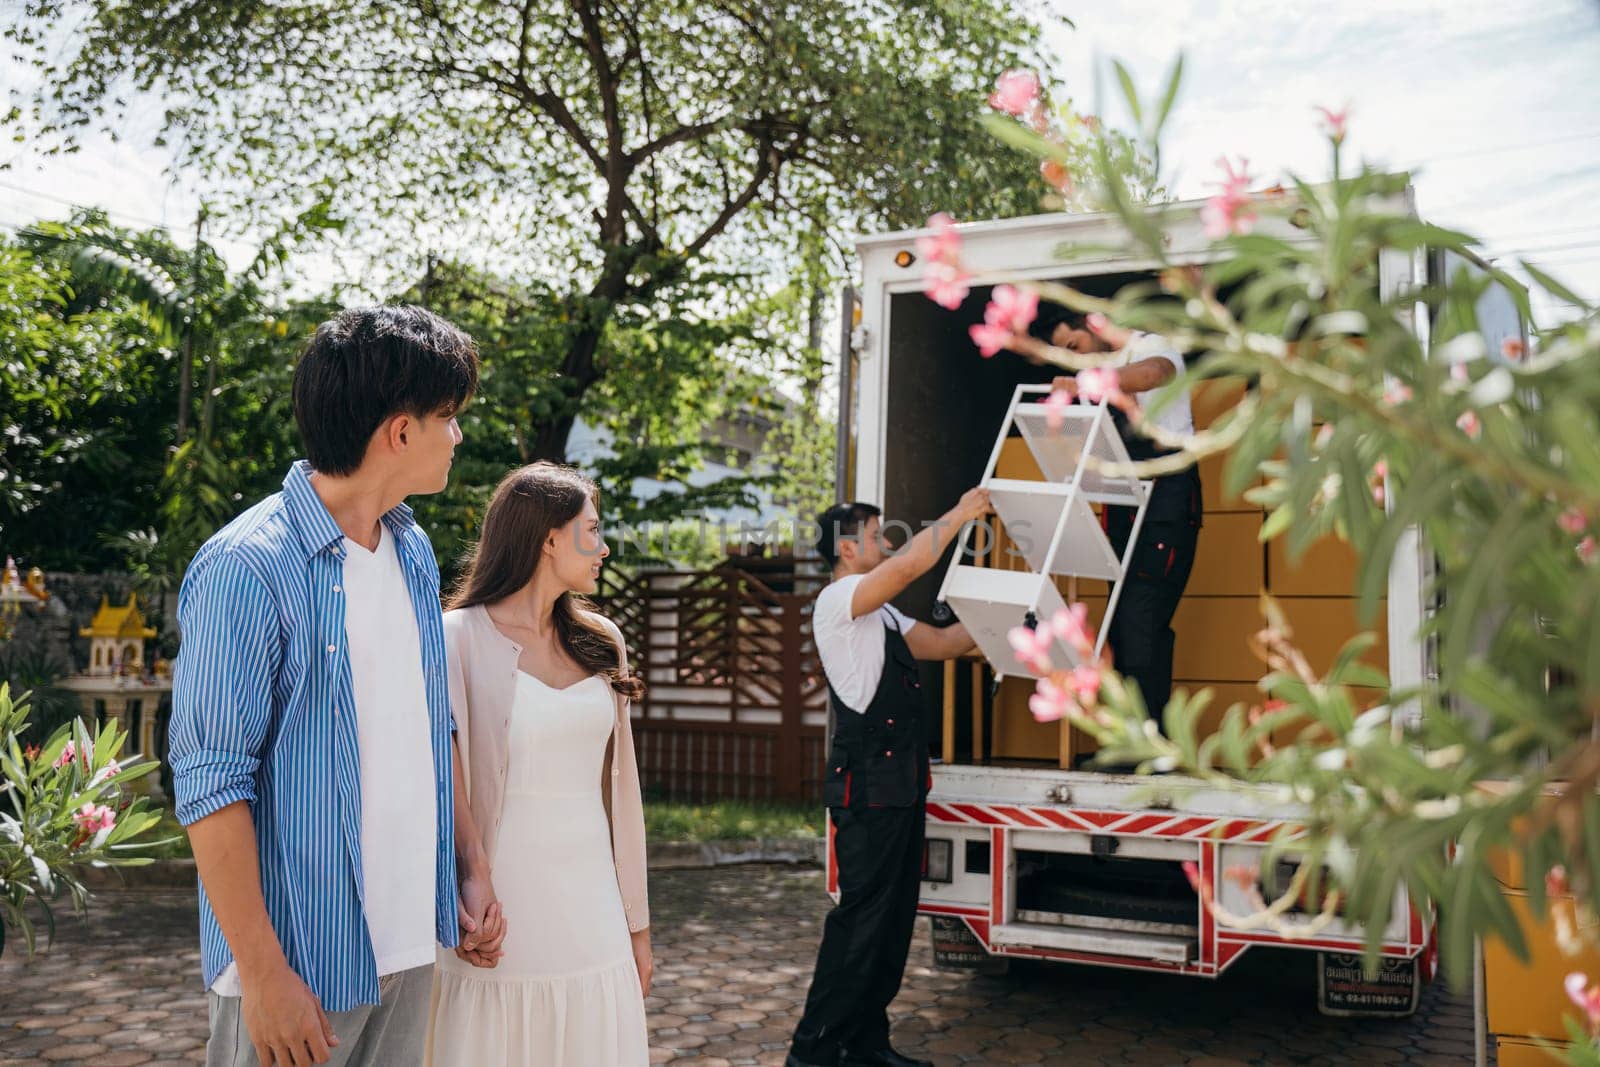 Professional movers assist a smiling newlywed couple captured in a portrait while loading furniture onto a truck. Quality service and teamwork ensure customer satisfaction. Moving Day Concept by Sorapop